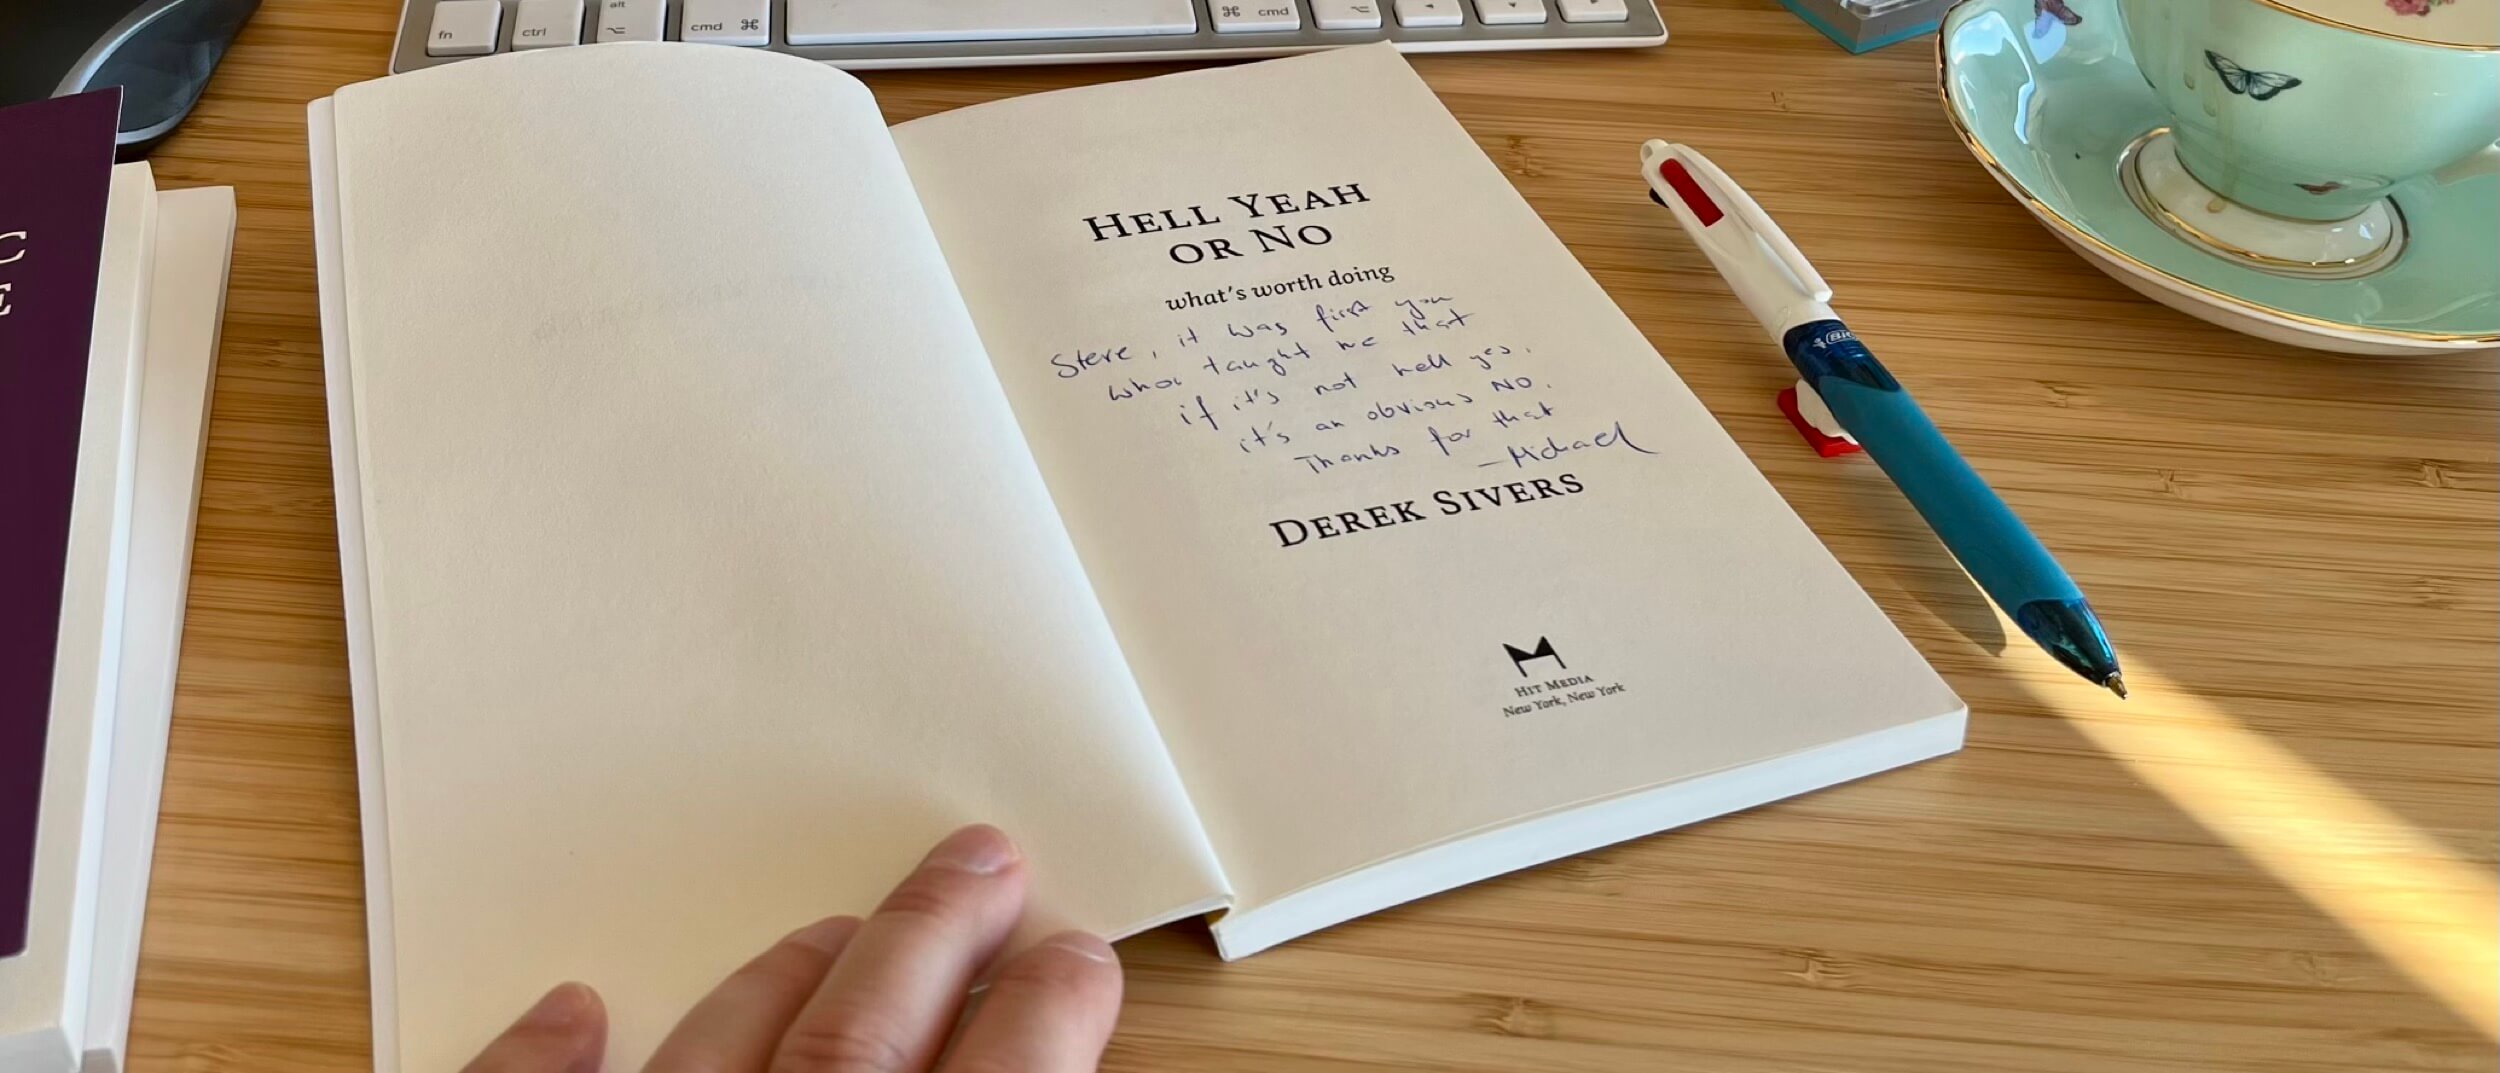 Hell yeah! Dedications I wrote to a friend on all 4 Derek Sivers books